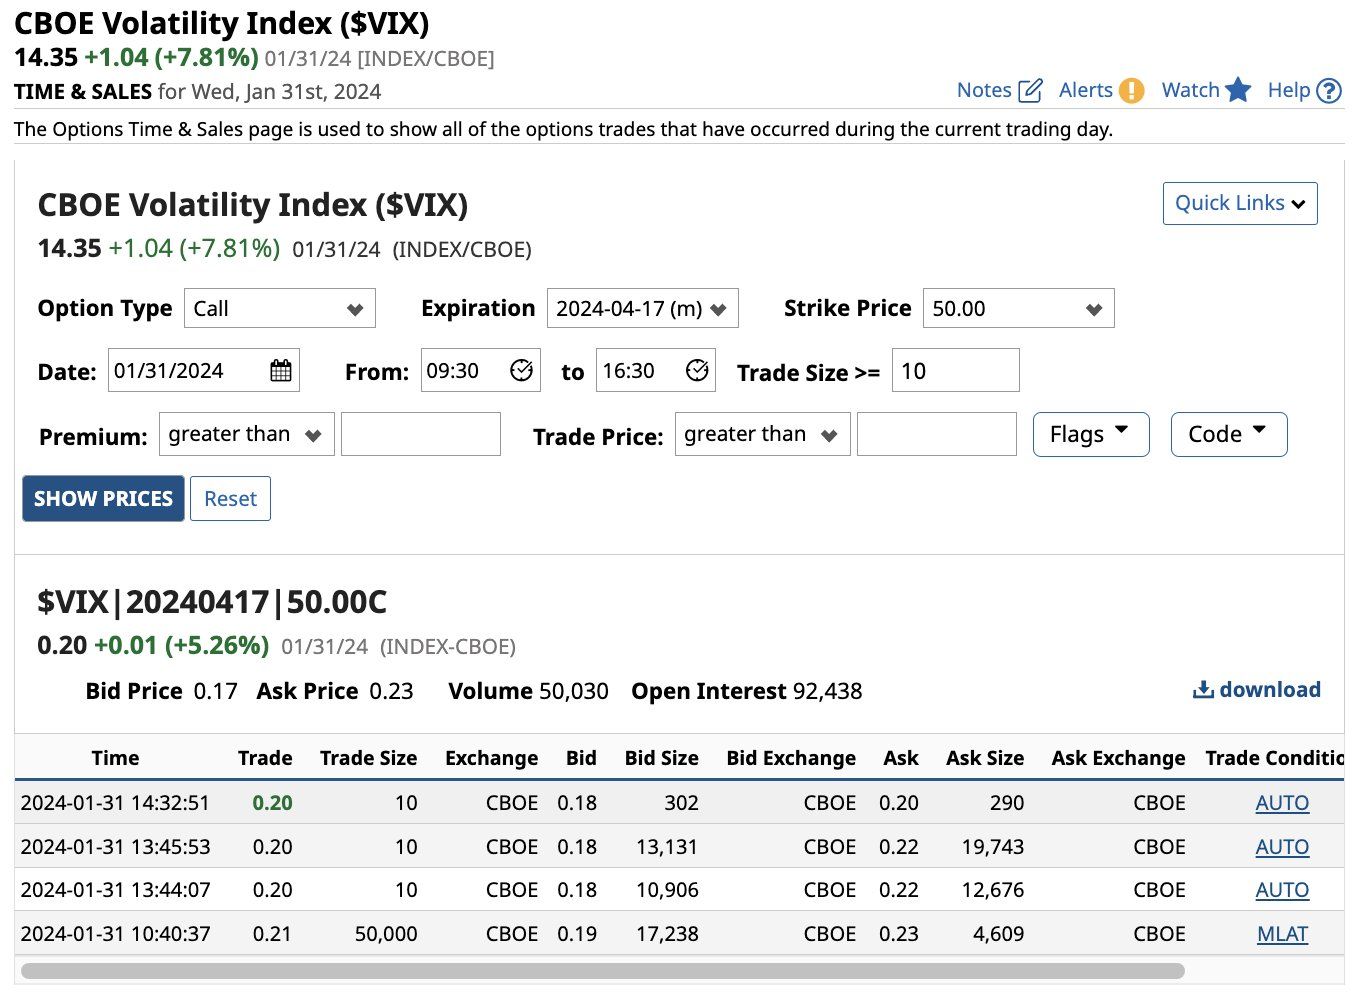 A Trader bought 50,000 CBOE Volatility Index $VIX April expiry 50 strike calls for $0.21 which is a total premium of just over $1 million.